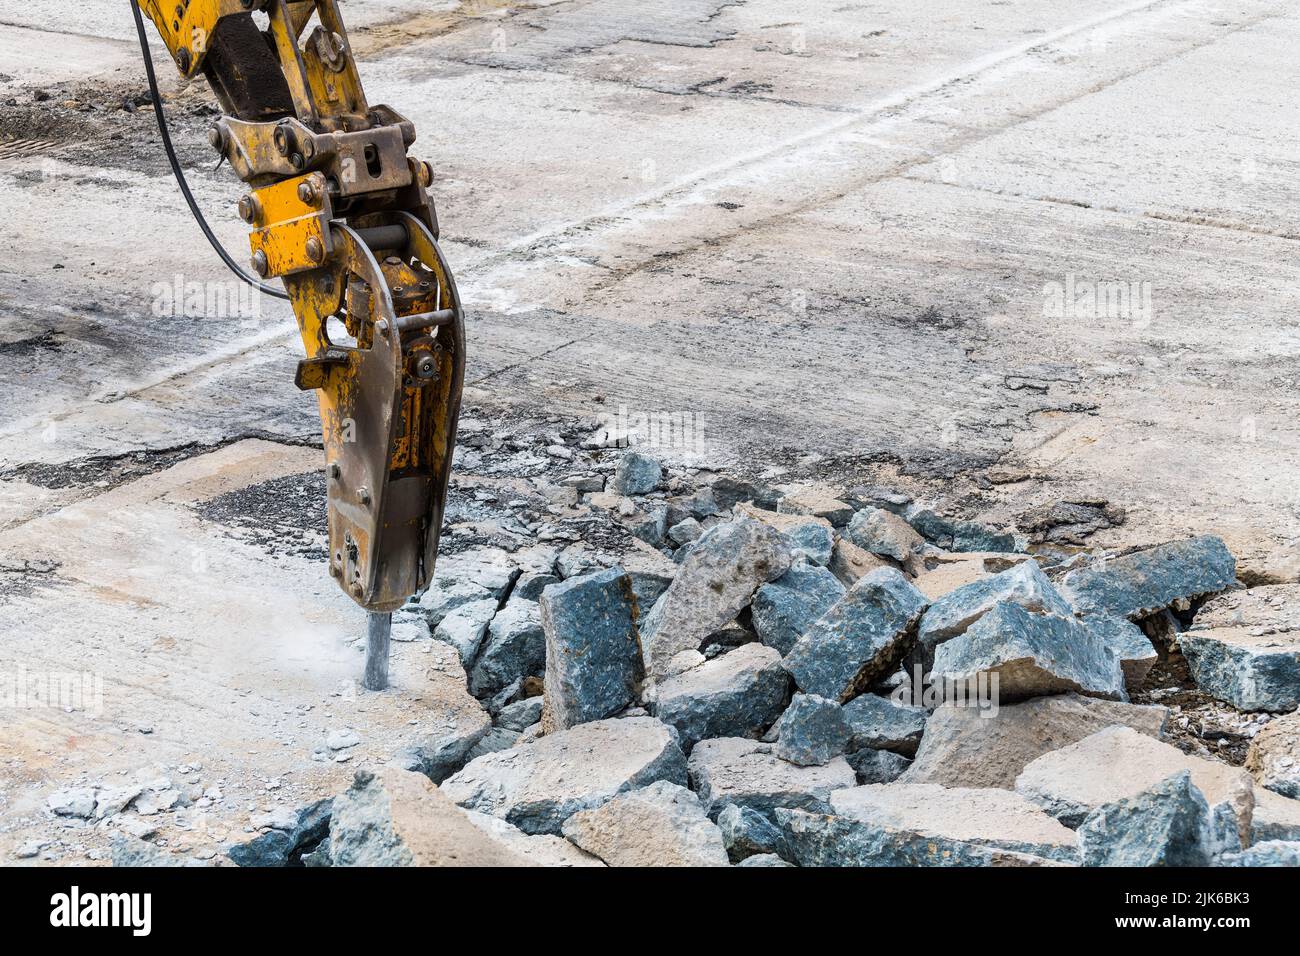 Excavator mounted hydraulic jackhammer at breaking a concrete area. Closeup of working demolition hammer. Heavy equipment detail on construction site. Stock Photo